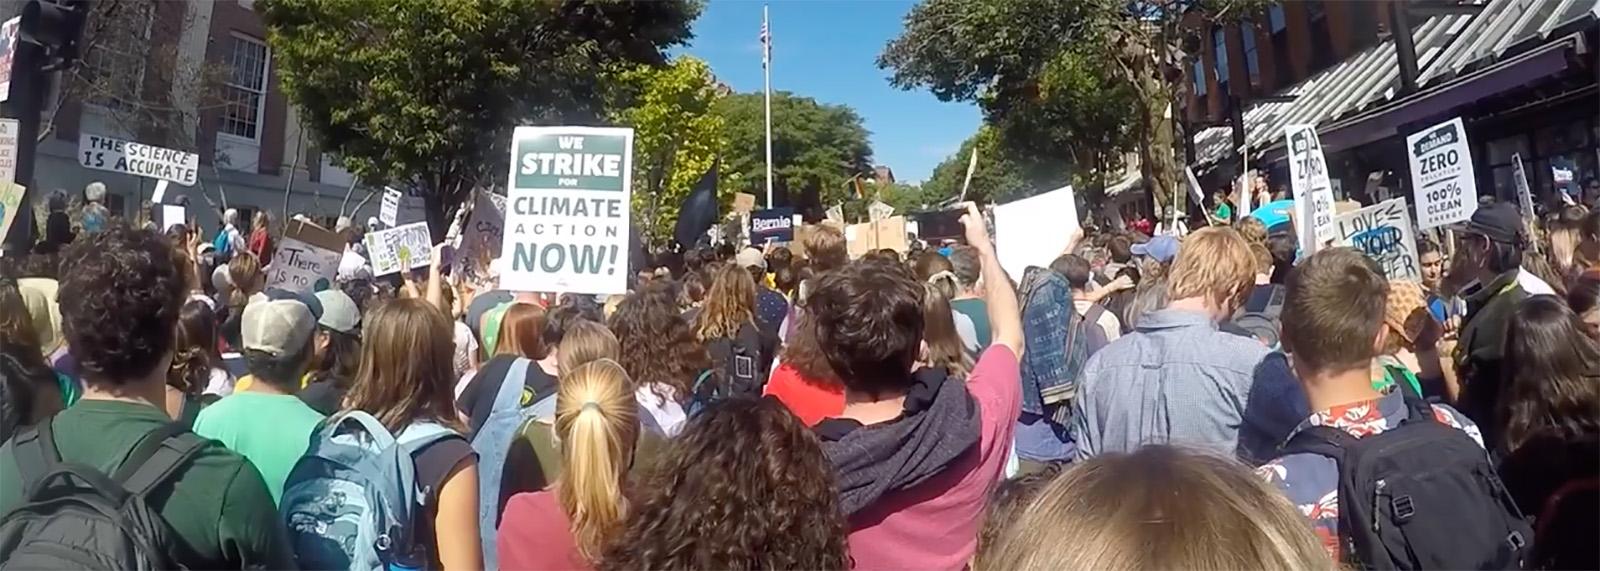 Students protesting in support of the Climate Change movement